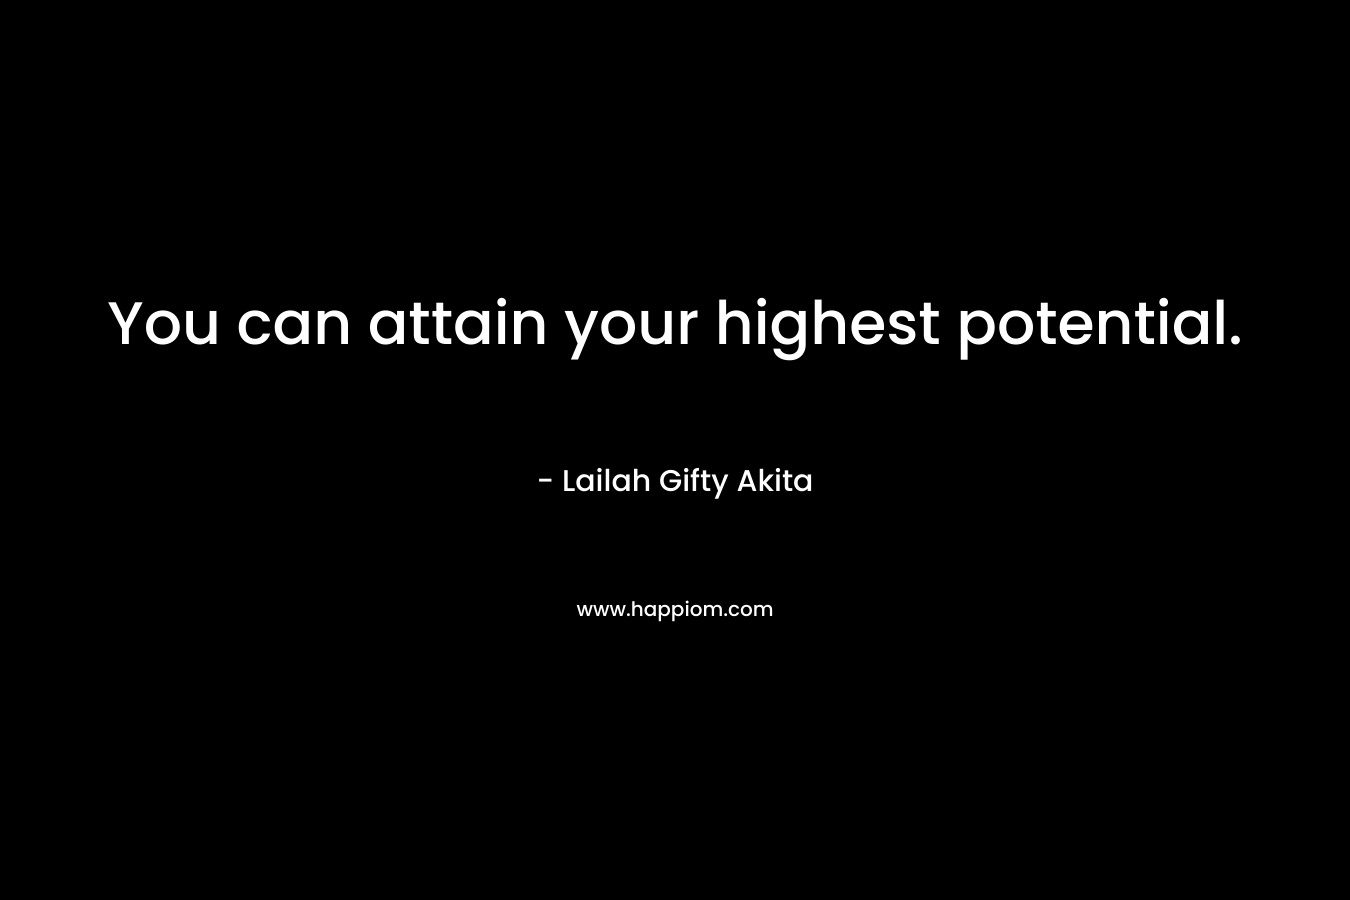 You can attain your highest potential.